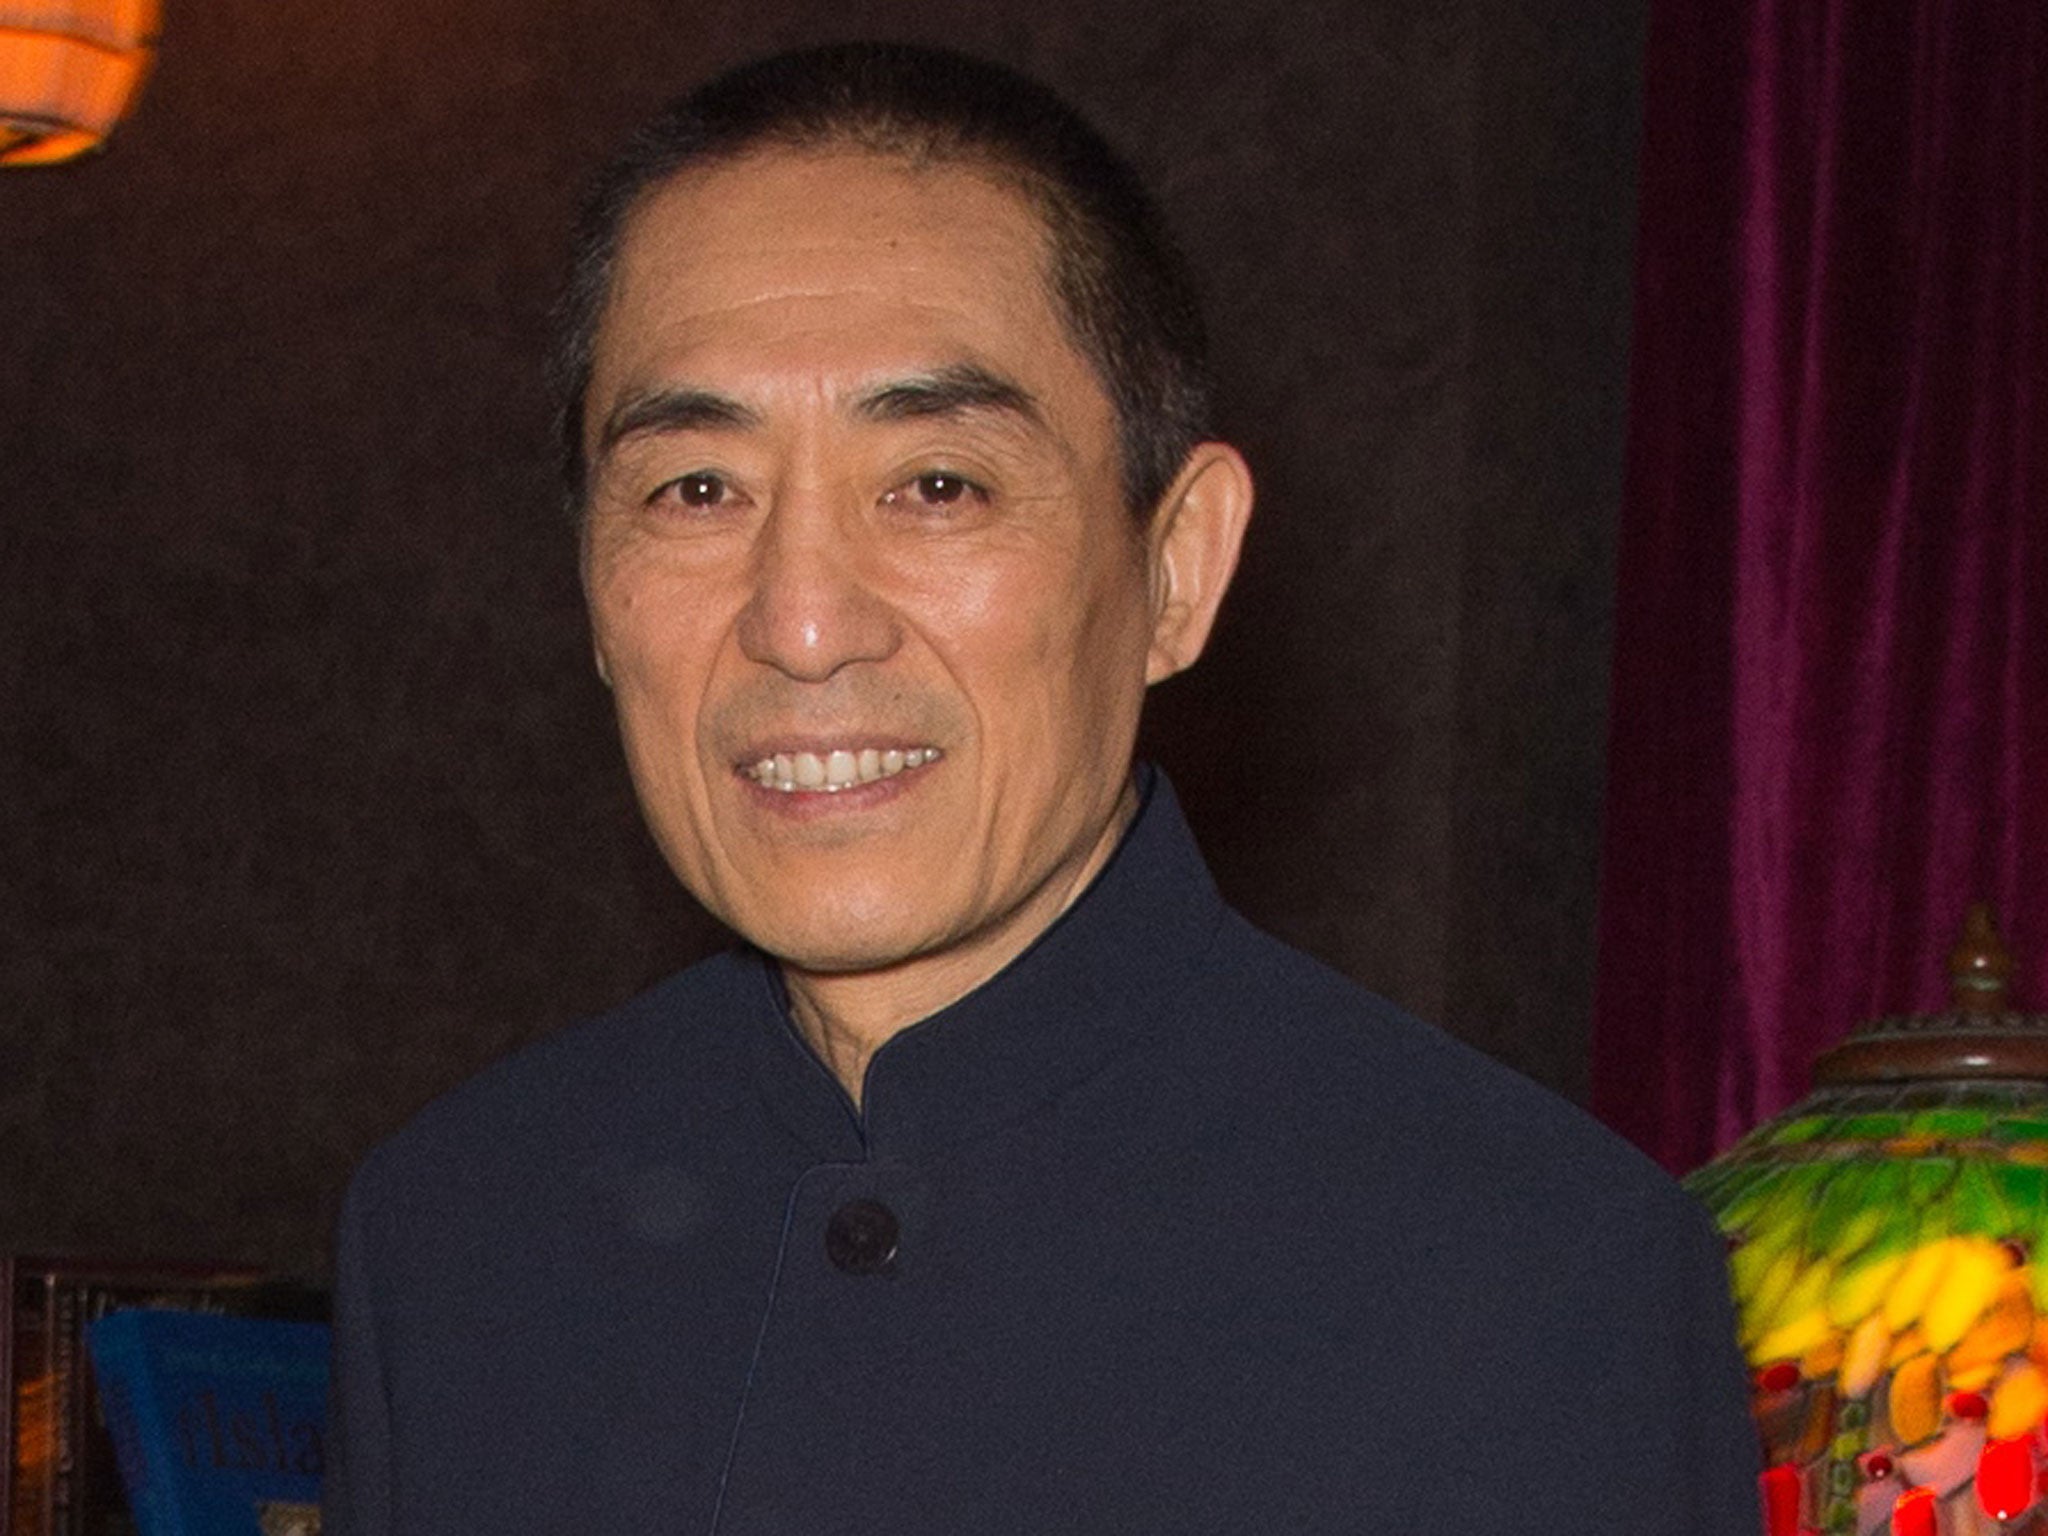 Zhang Yimou: The director is said to have violated China’s one-child policy